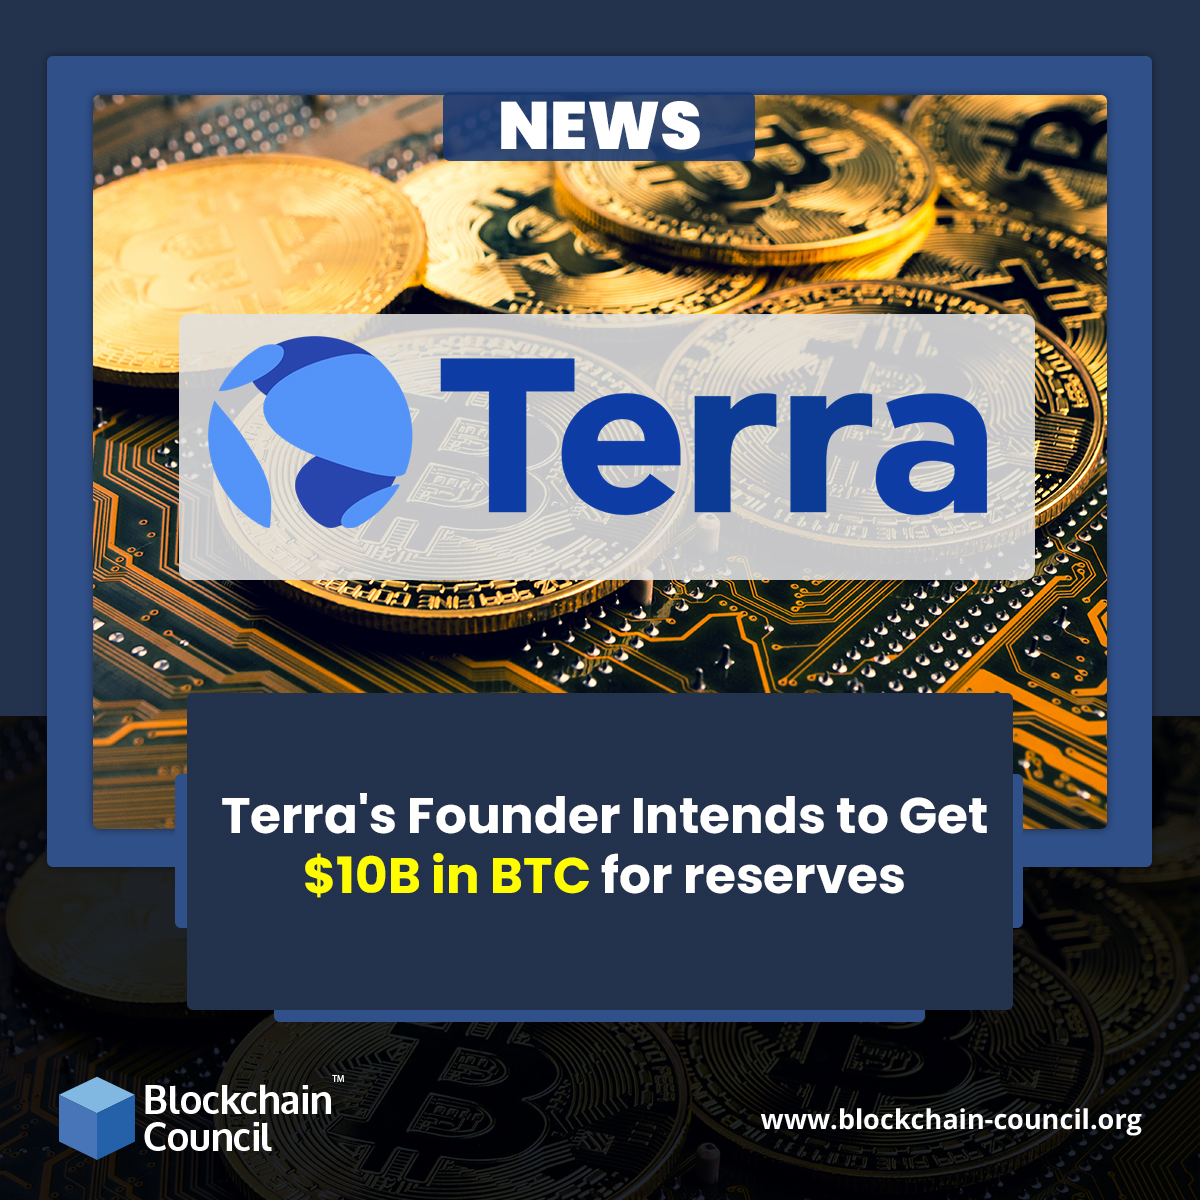 Terra's Founder Intends to Get $10B in BTC for reserves